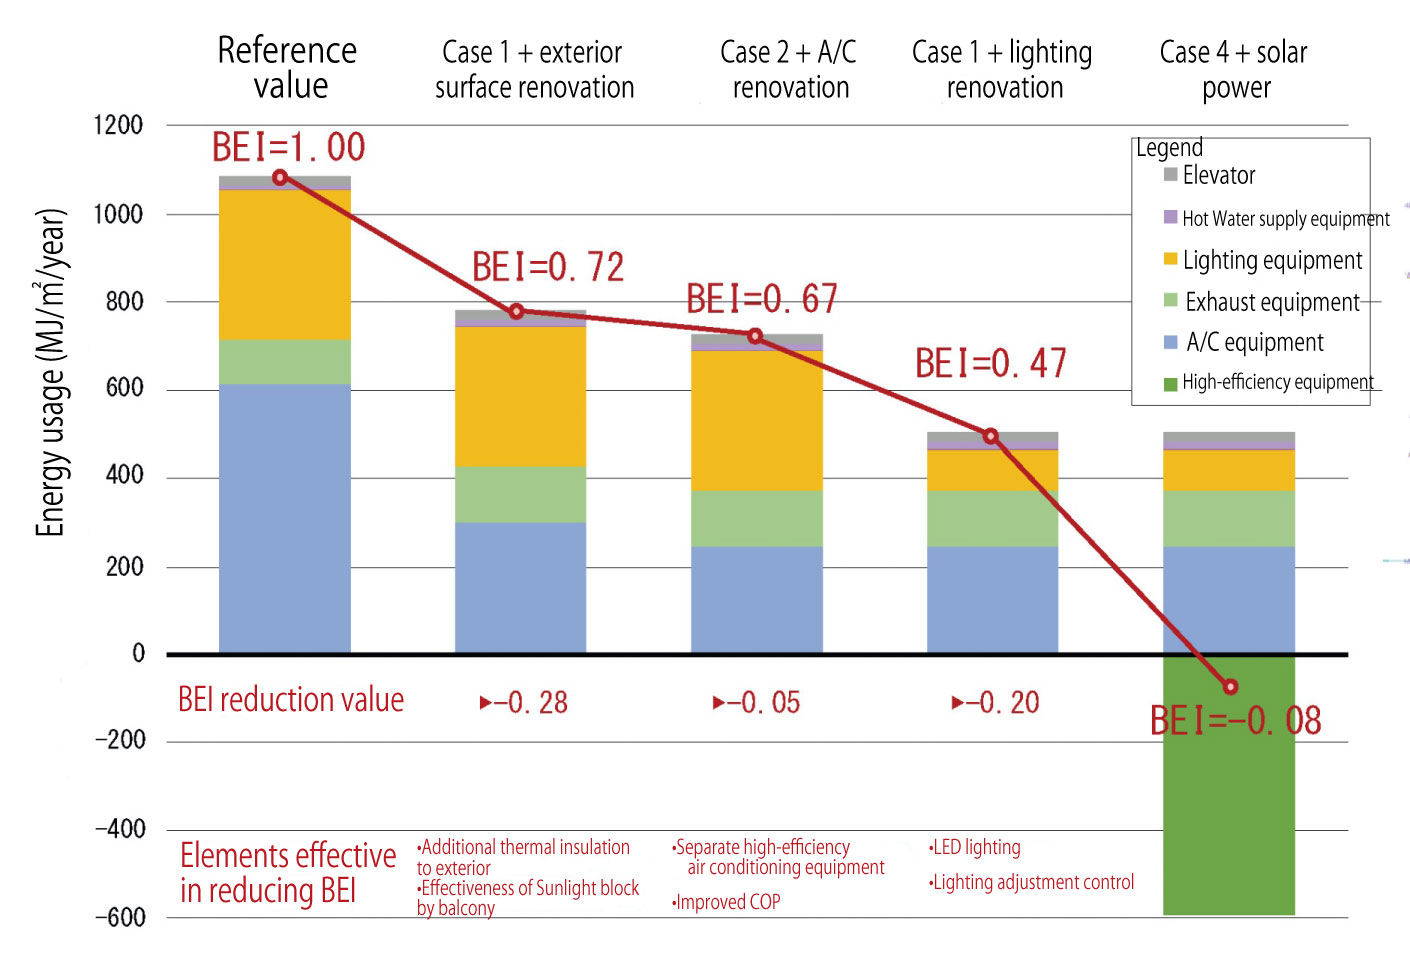 We achieved a primary energy usage coefficient of -0.08 compared to the reference value through additional exterior thermal insulation, upgrading the air conditioning and lighting, and solar power.